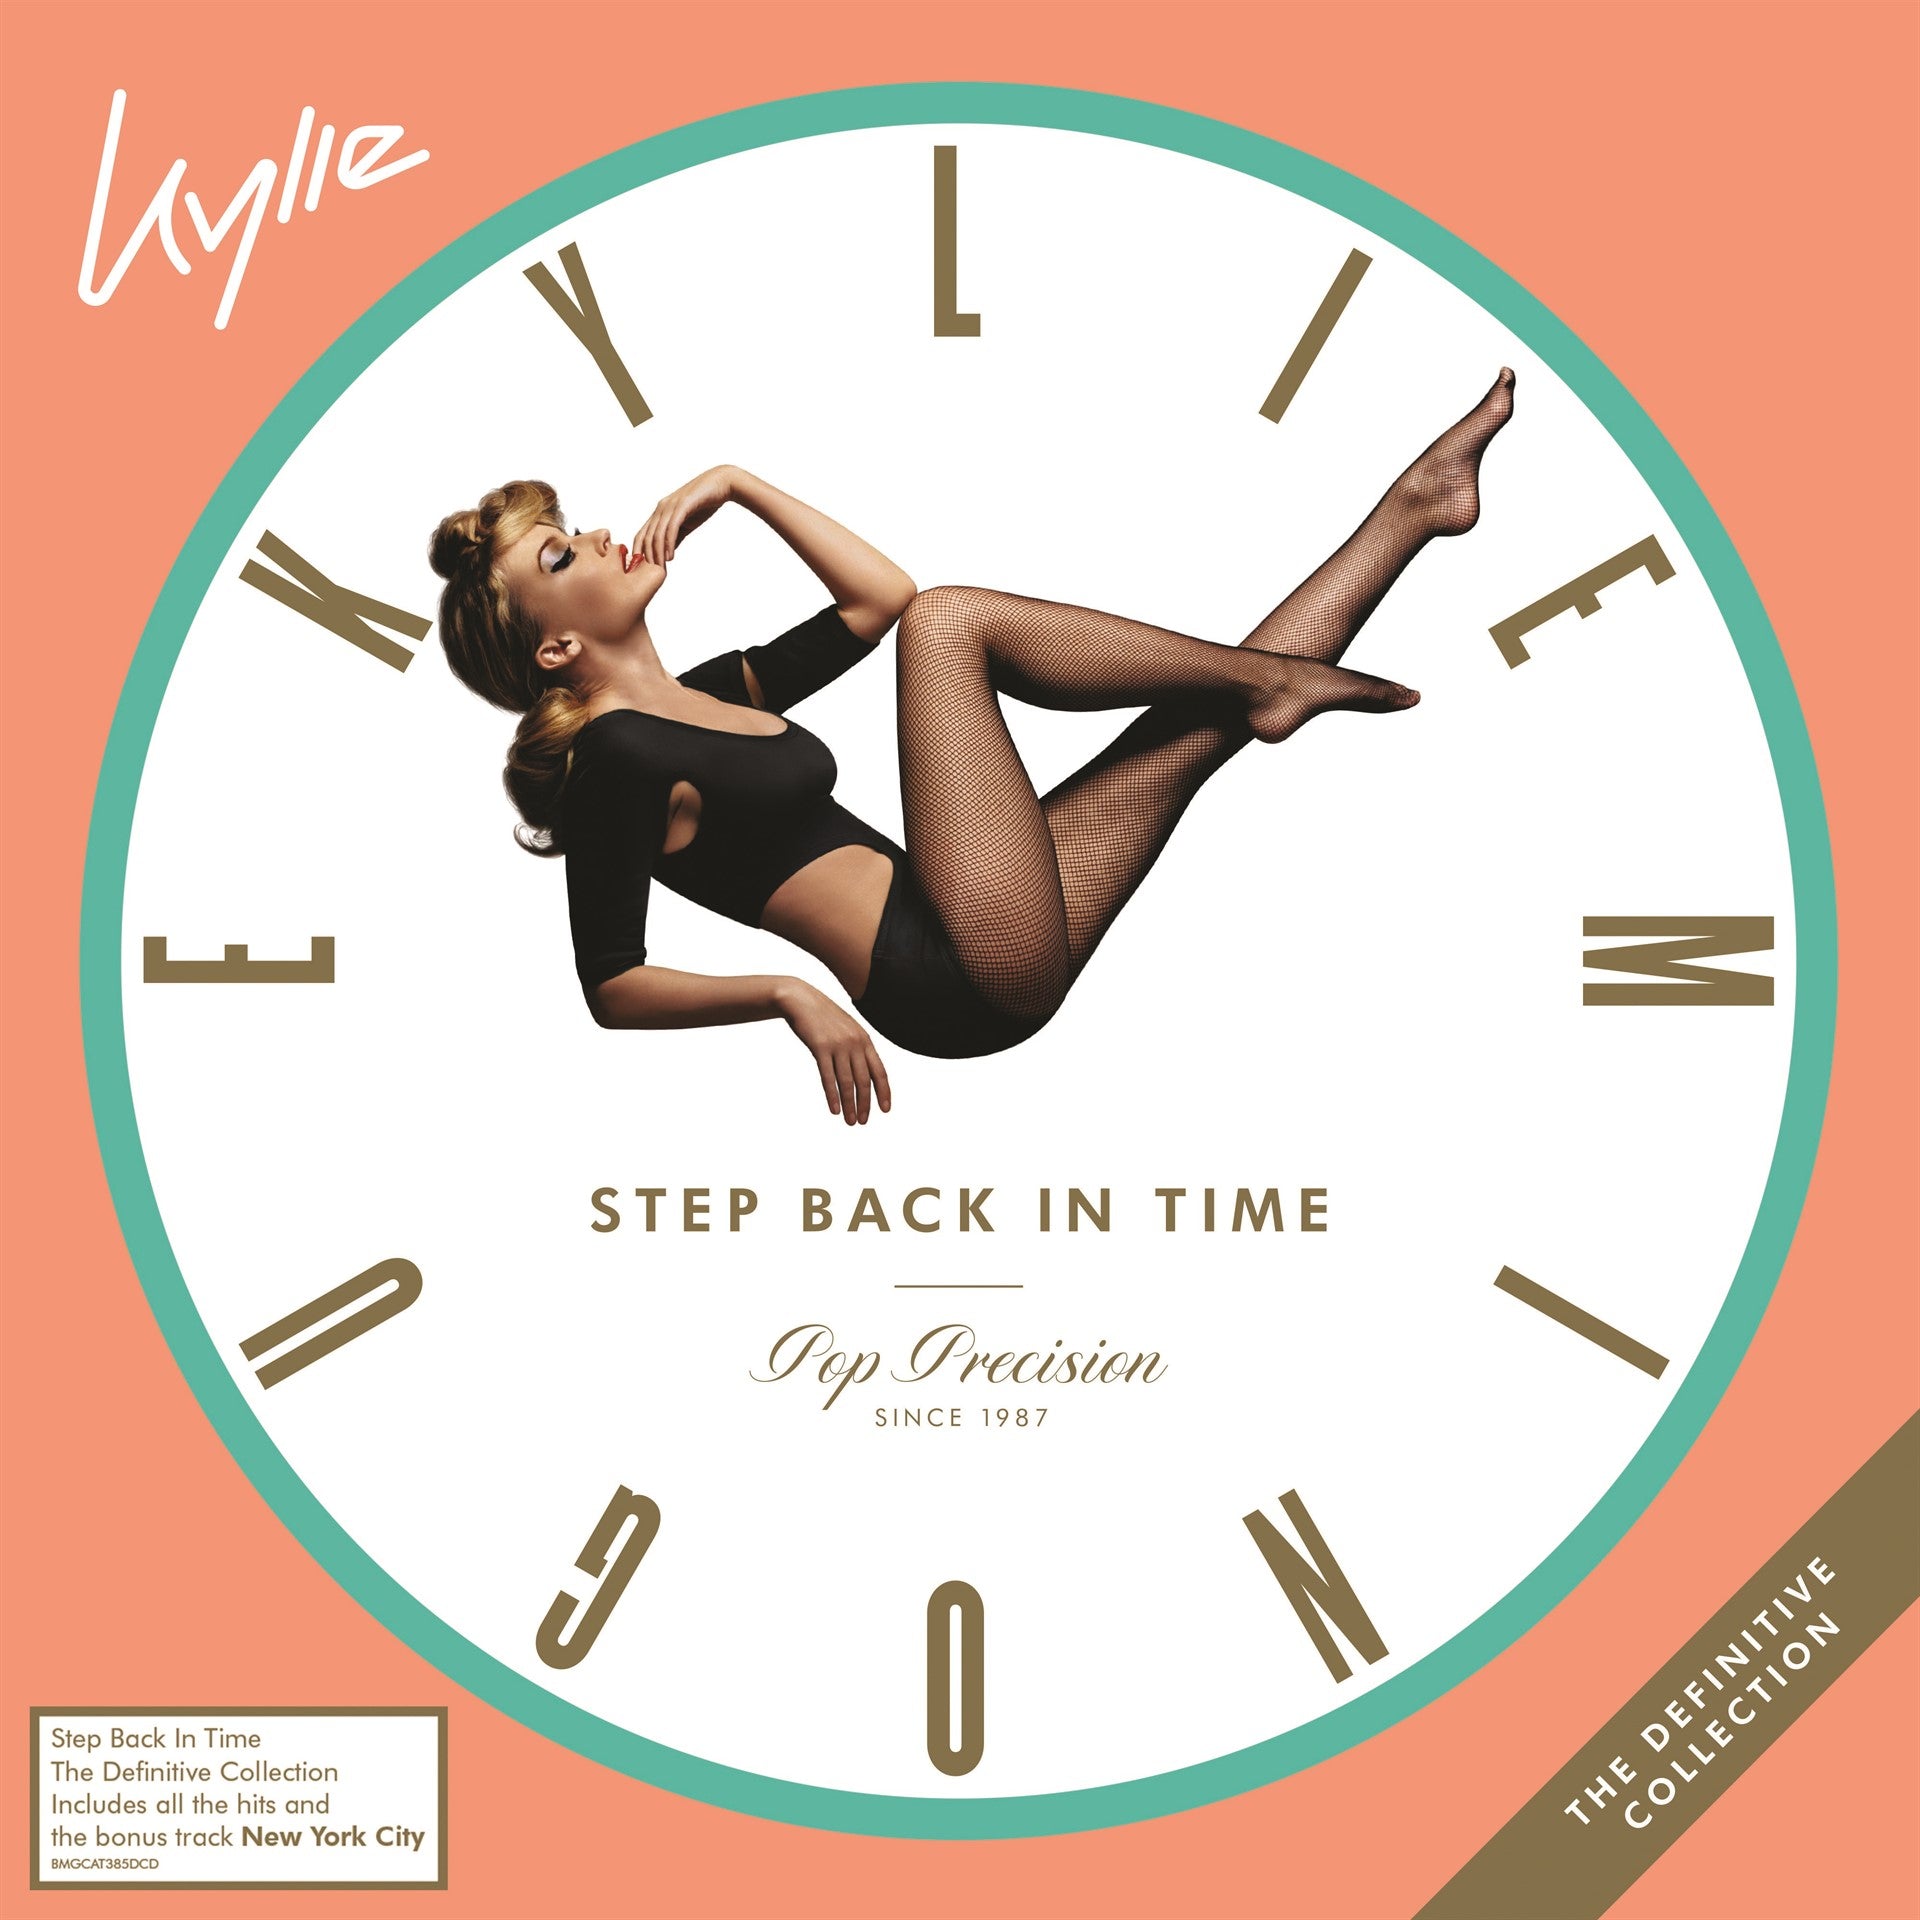 CD x 2 Kylie Minogue · Step Back in Time